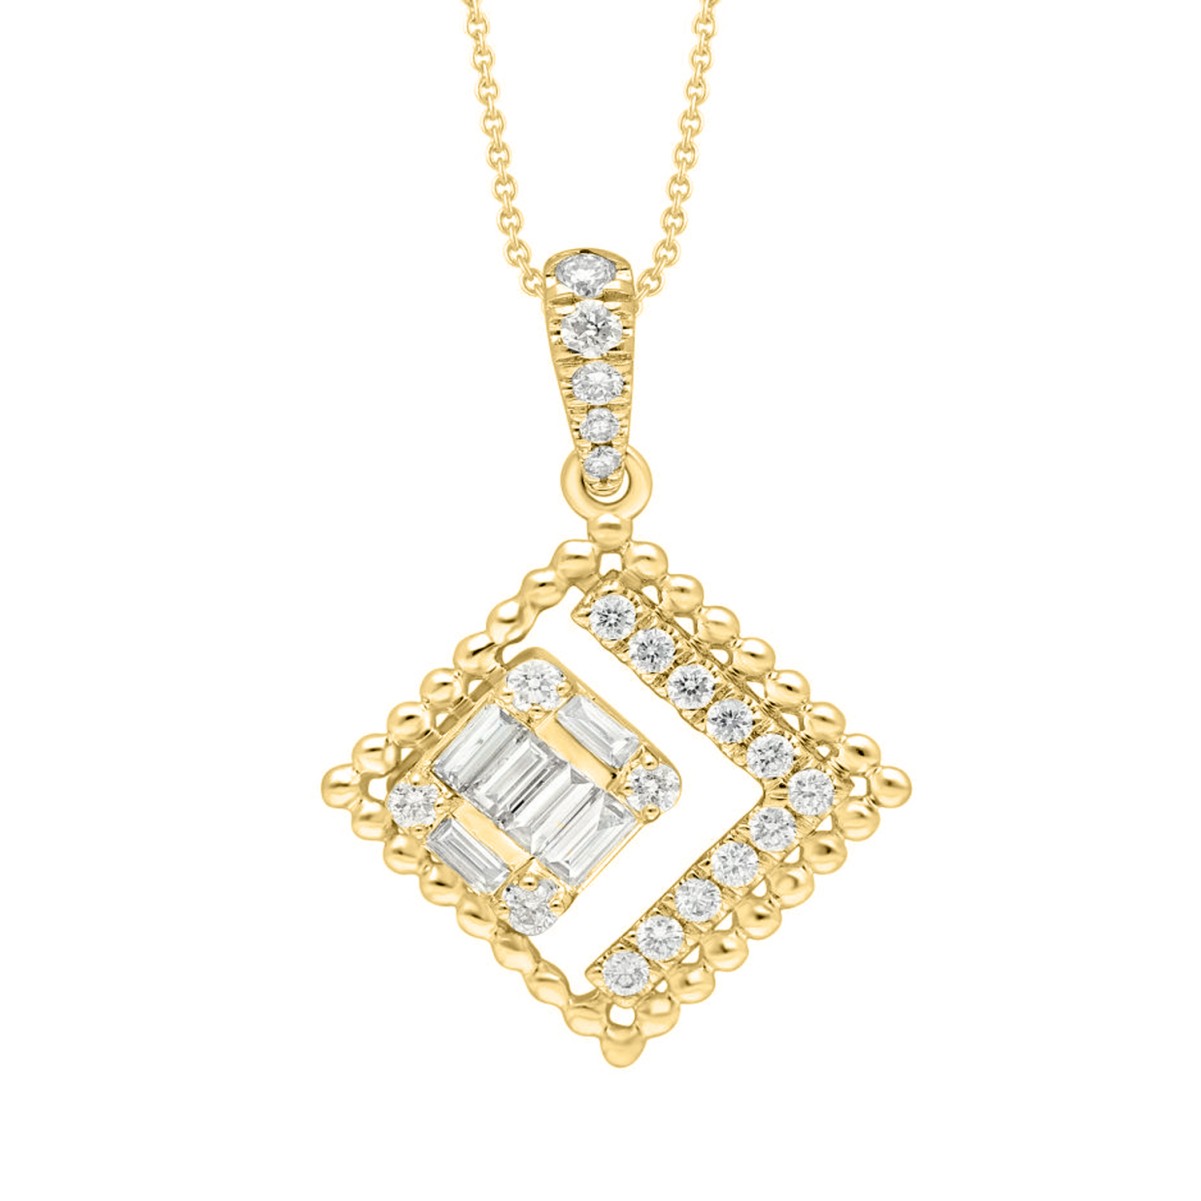 14K YELLOW GOLD 1/3CT ROUND/BAGUETTE DIAMOND LADIES PENDANT WITH CHAIN  